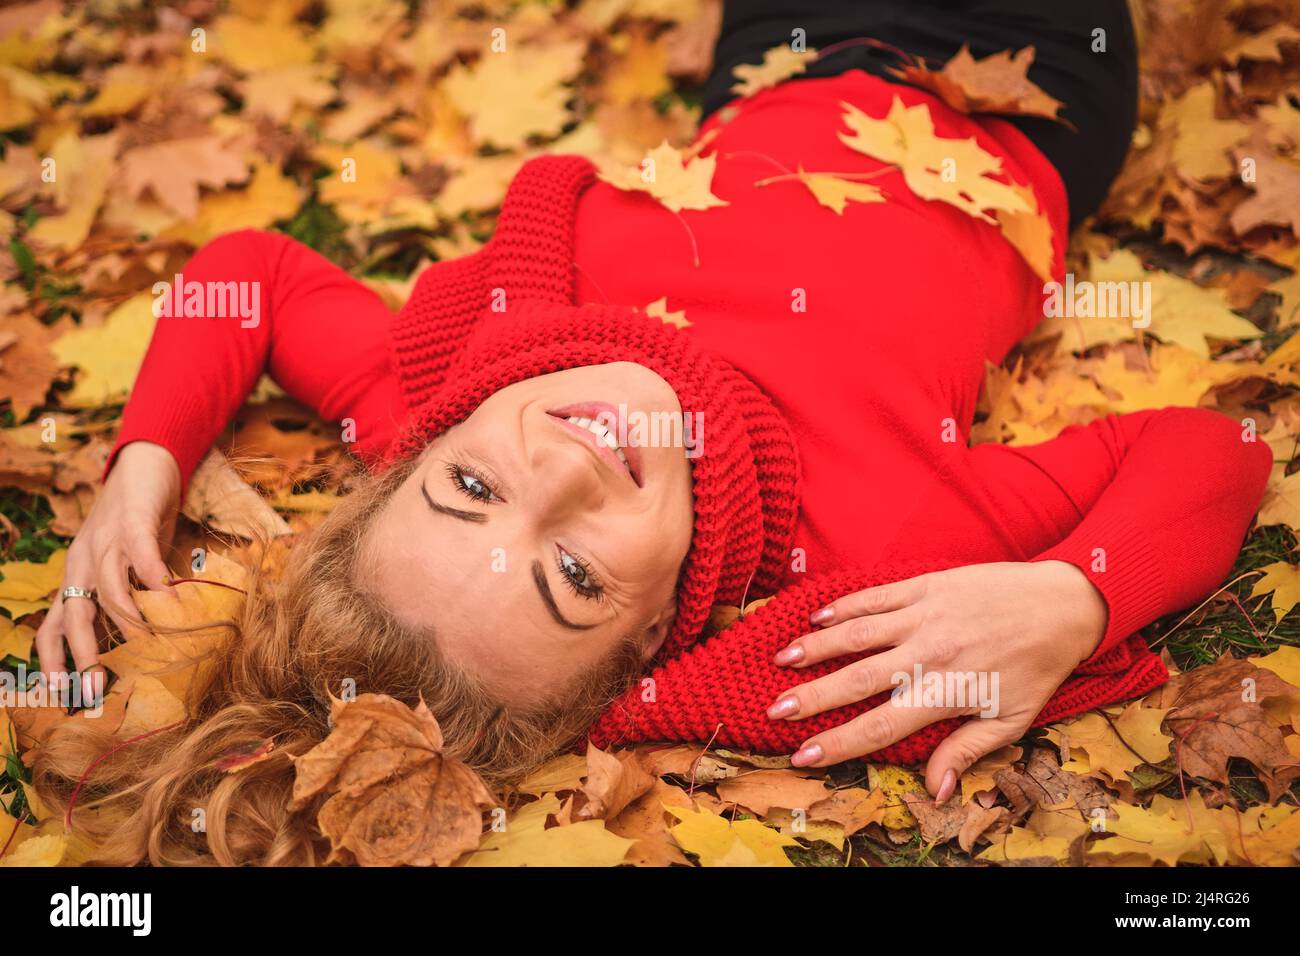 Beautiful female autumn session. Girl with blonde hair in a city park among autumn leaves. Stock Photo